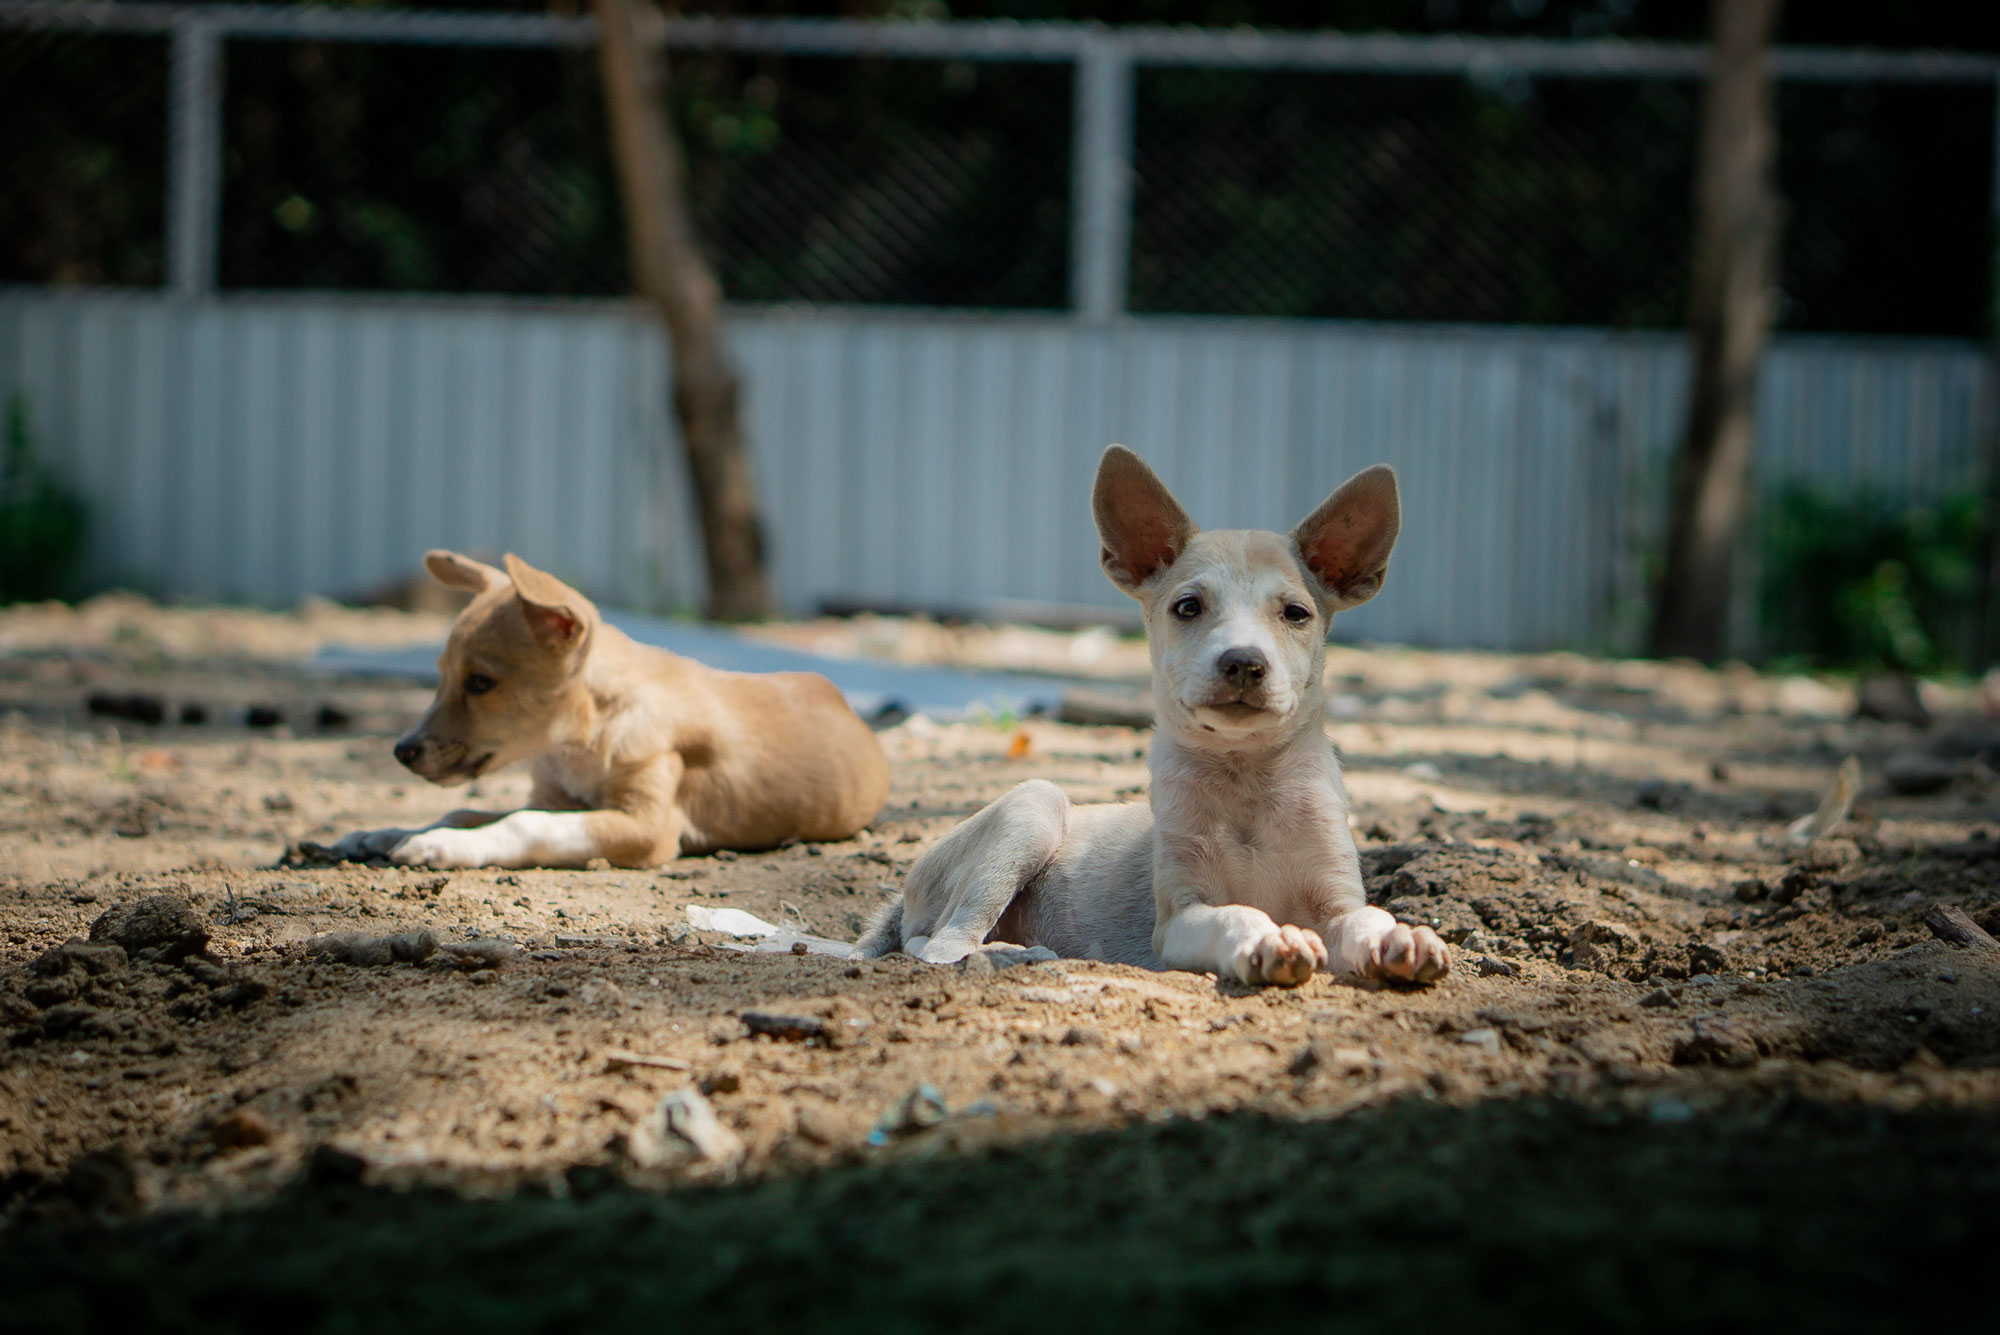 Photo: Soi Dog Foundation / Bangkok is home to an estimated 640,000 free-roaming dogs.